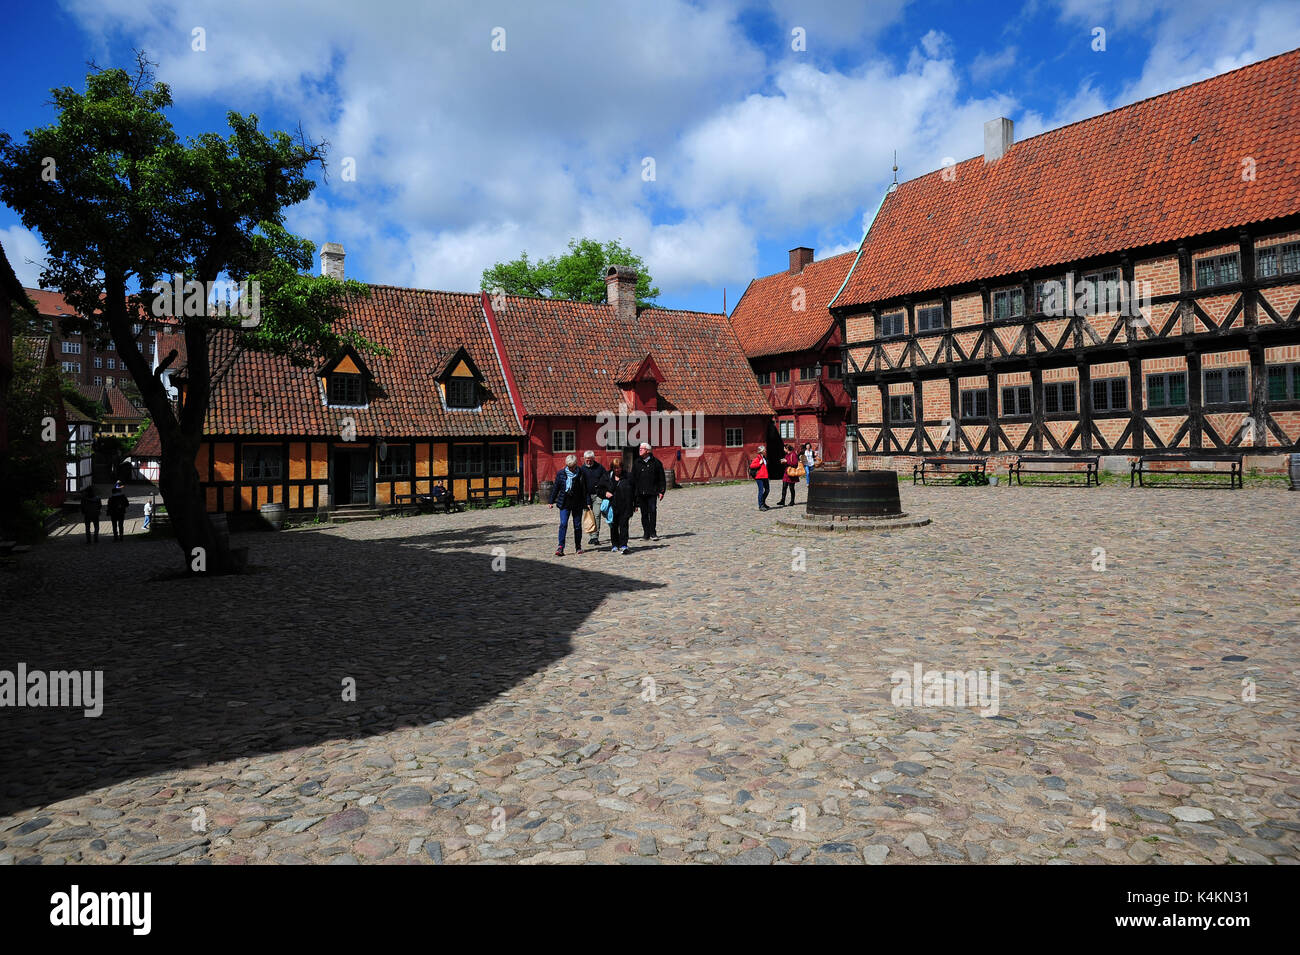 Travel back in time at Den Gamle By (The Old Town), an open-air folk museum known in Aarhus, Denmark. With 75 historic buildings carefully moved here  Stock Photo